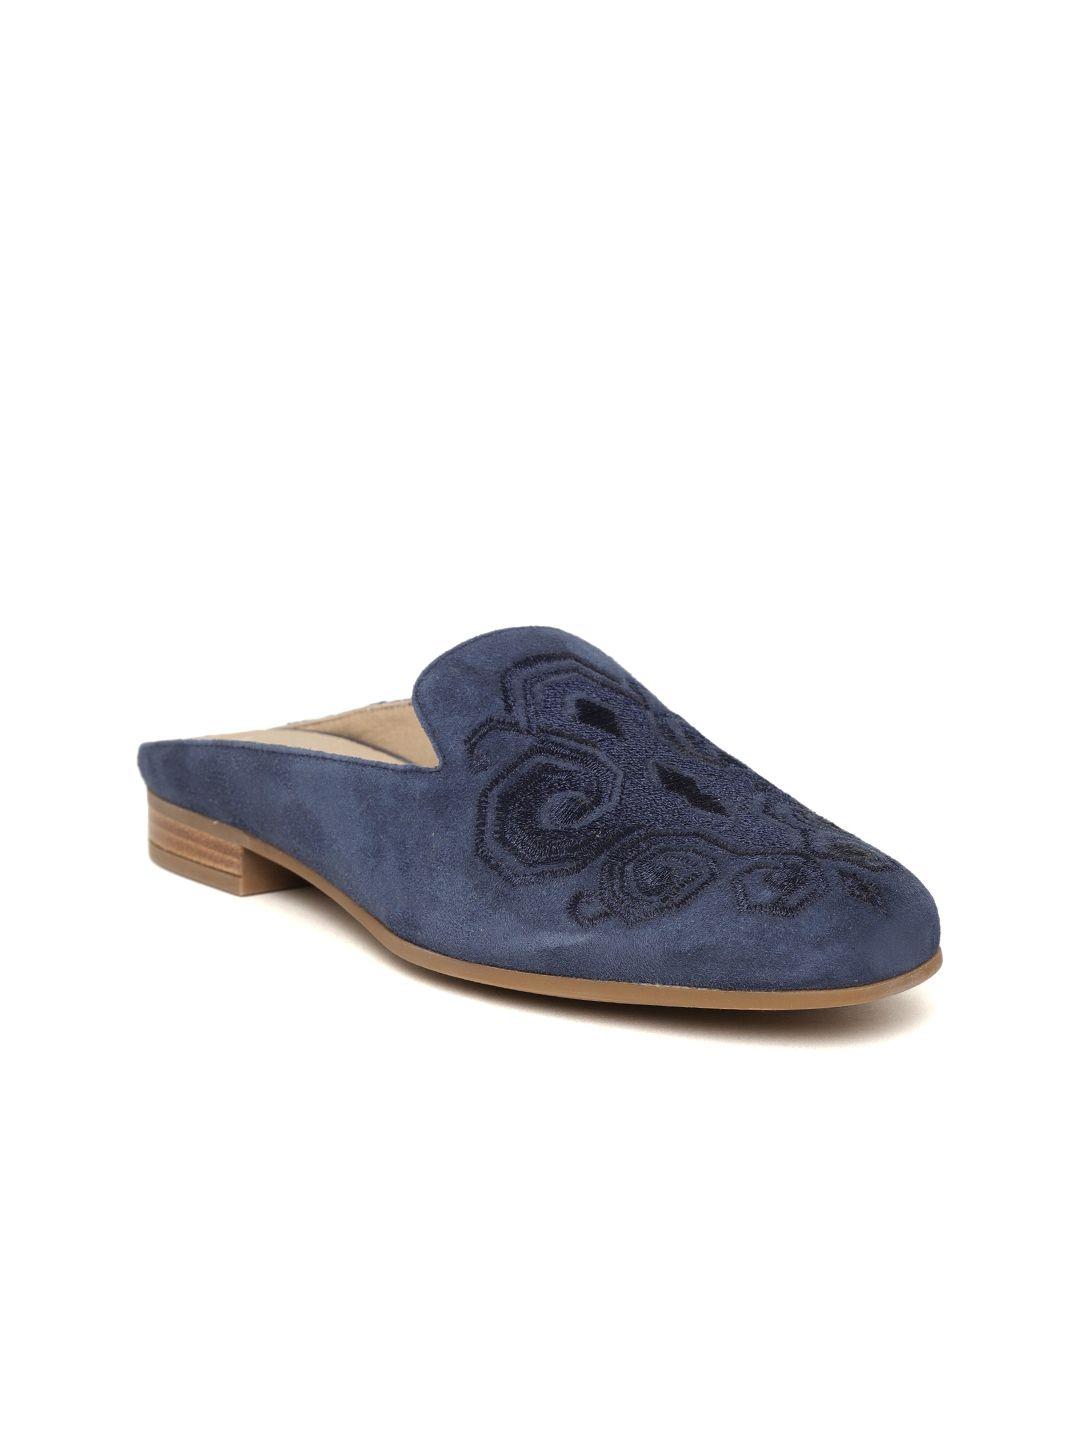 geox-women-navy-blue-suede-leather-embroidered-mules